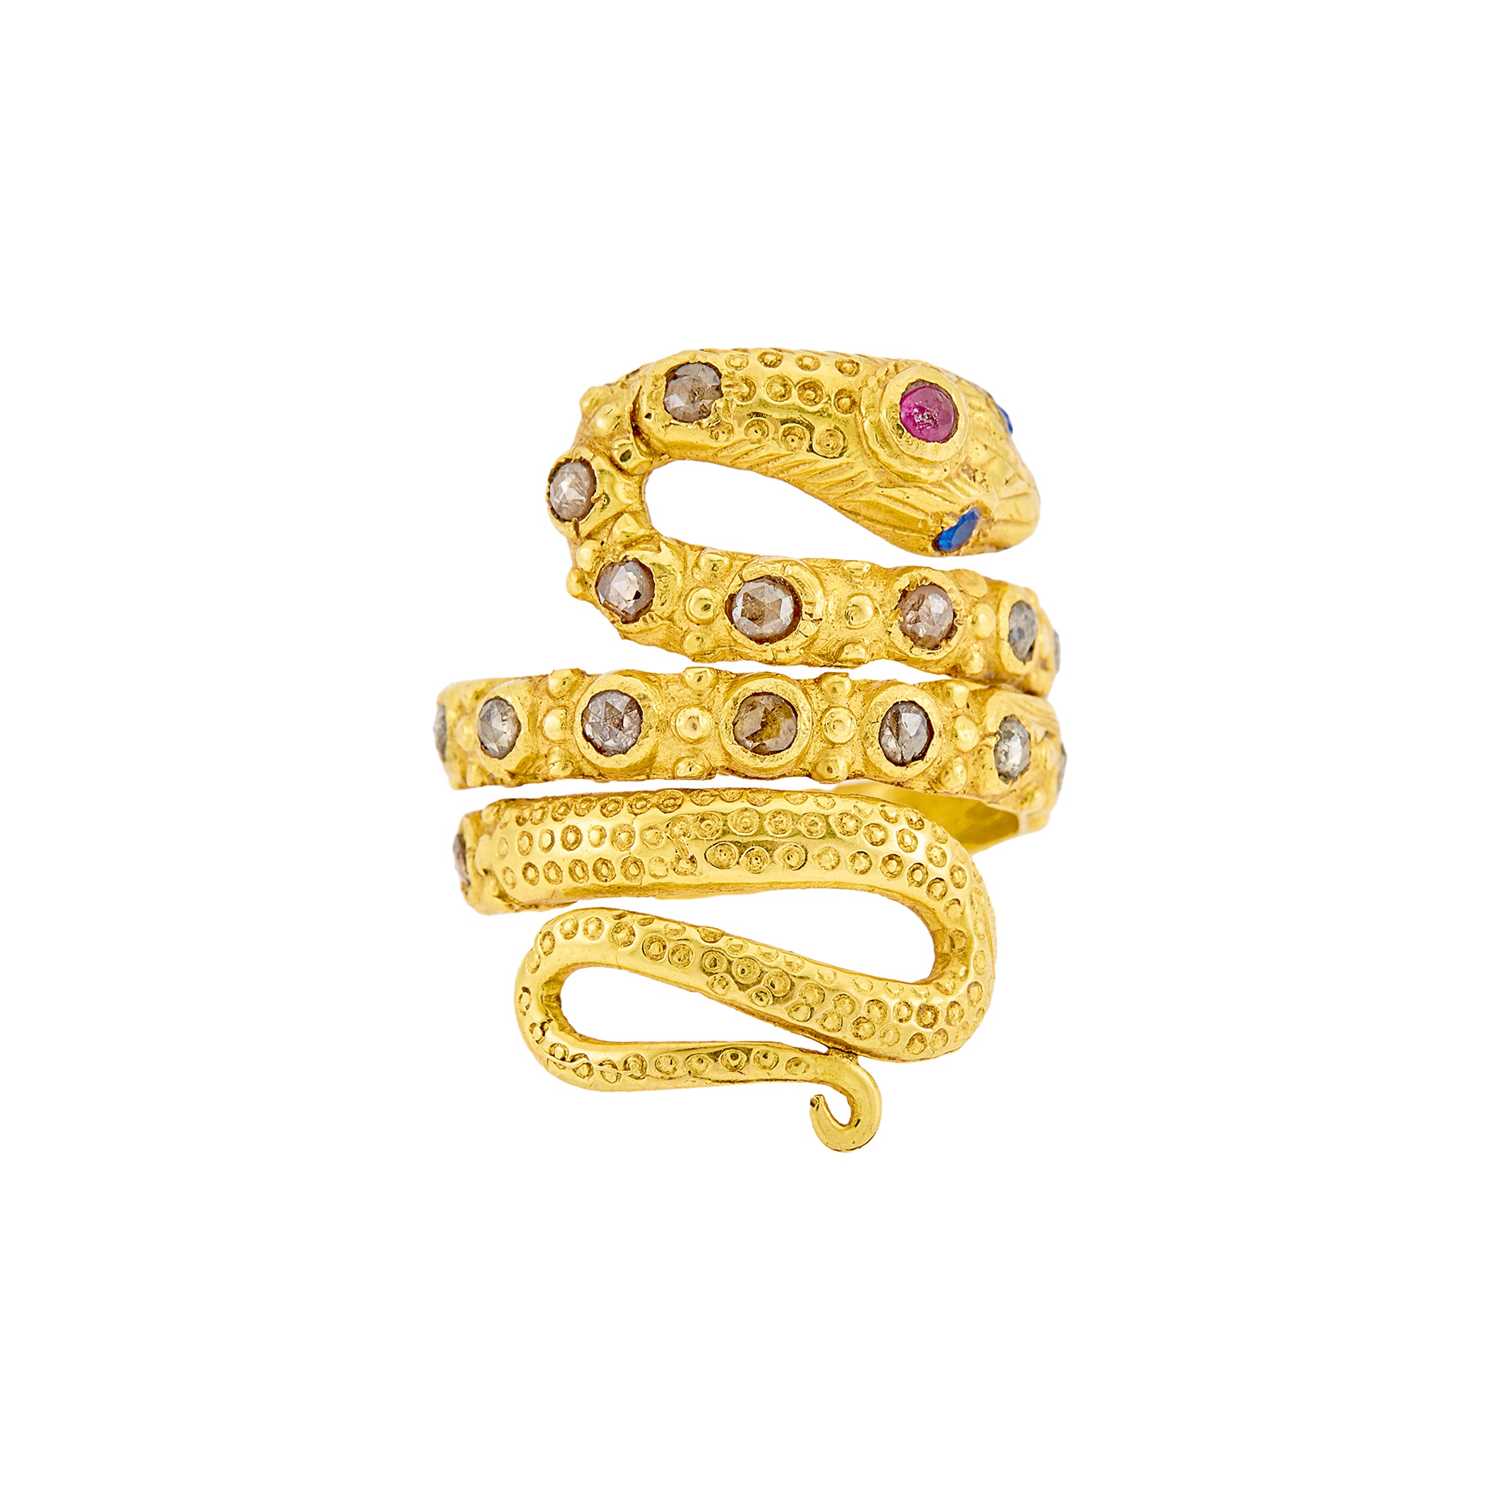 Lot 1074 - Gold, Diamond, Ruby and Sapphire Snake Ring